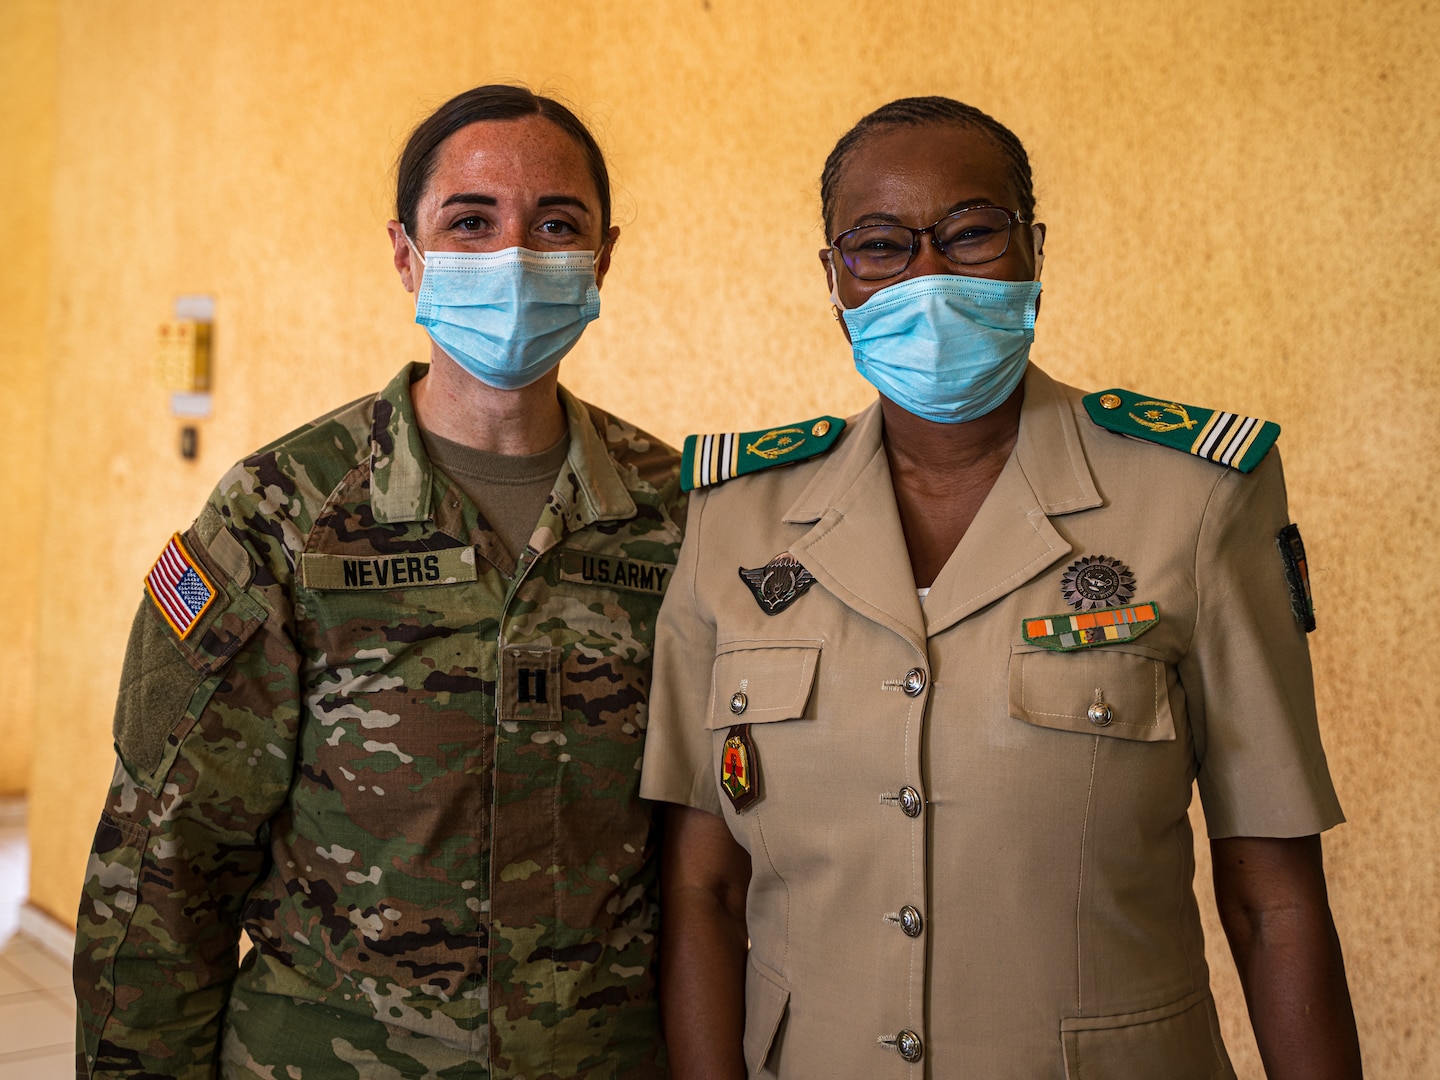 Indiana National Guard Cpt. Jennifer Nevers, a behavioral health officer with the Indiana National Guard’s 738th Medical Company Area Support, meets Lt. Col. Aichatou Ousmane Issaka, the Niger Armed Forces director of psychological and social services, in Niamey, Niger, to strategize on mental health issues for the military. The Indiana Guard and Niger are partners under the National Guard State Partnership Program.